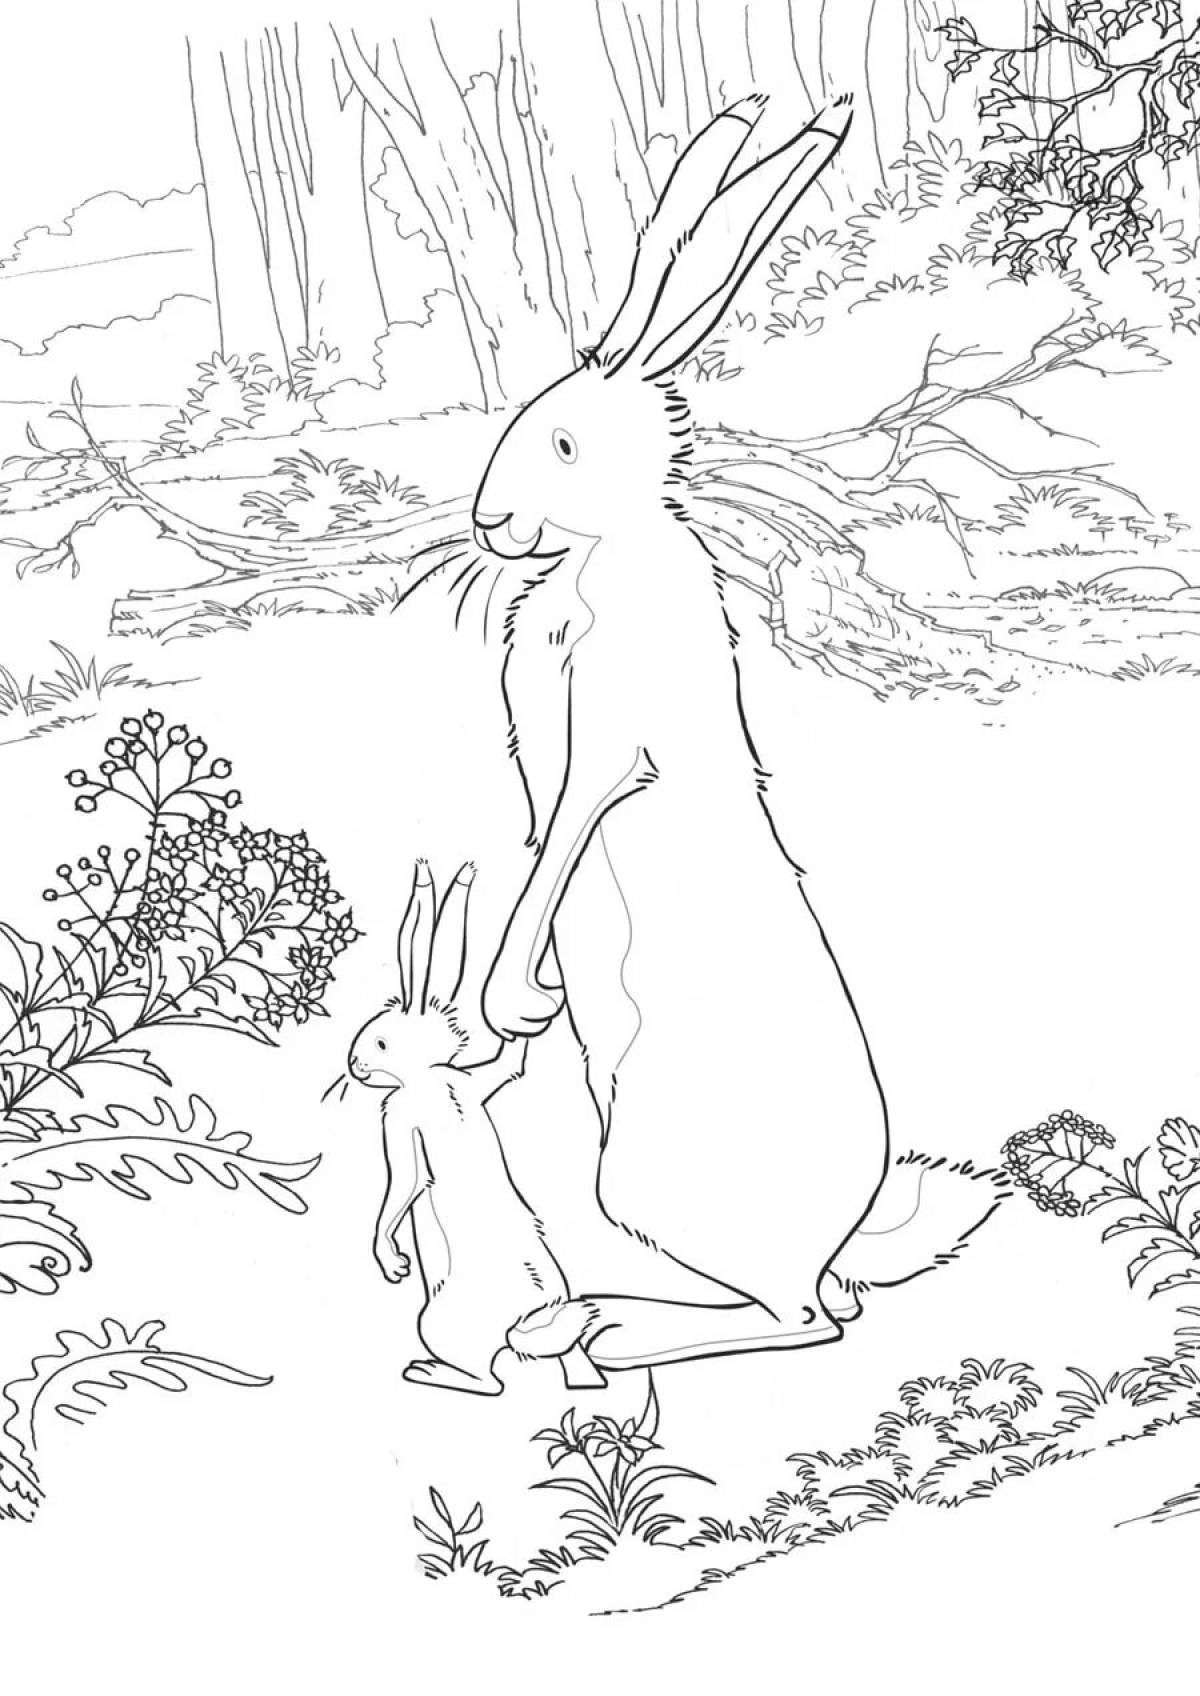 Bunny in the forest #3